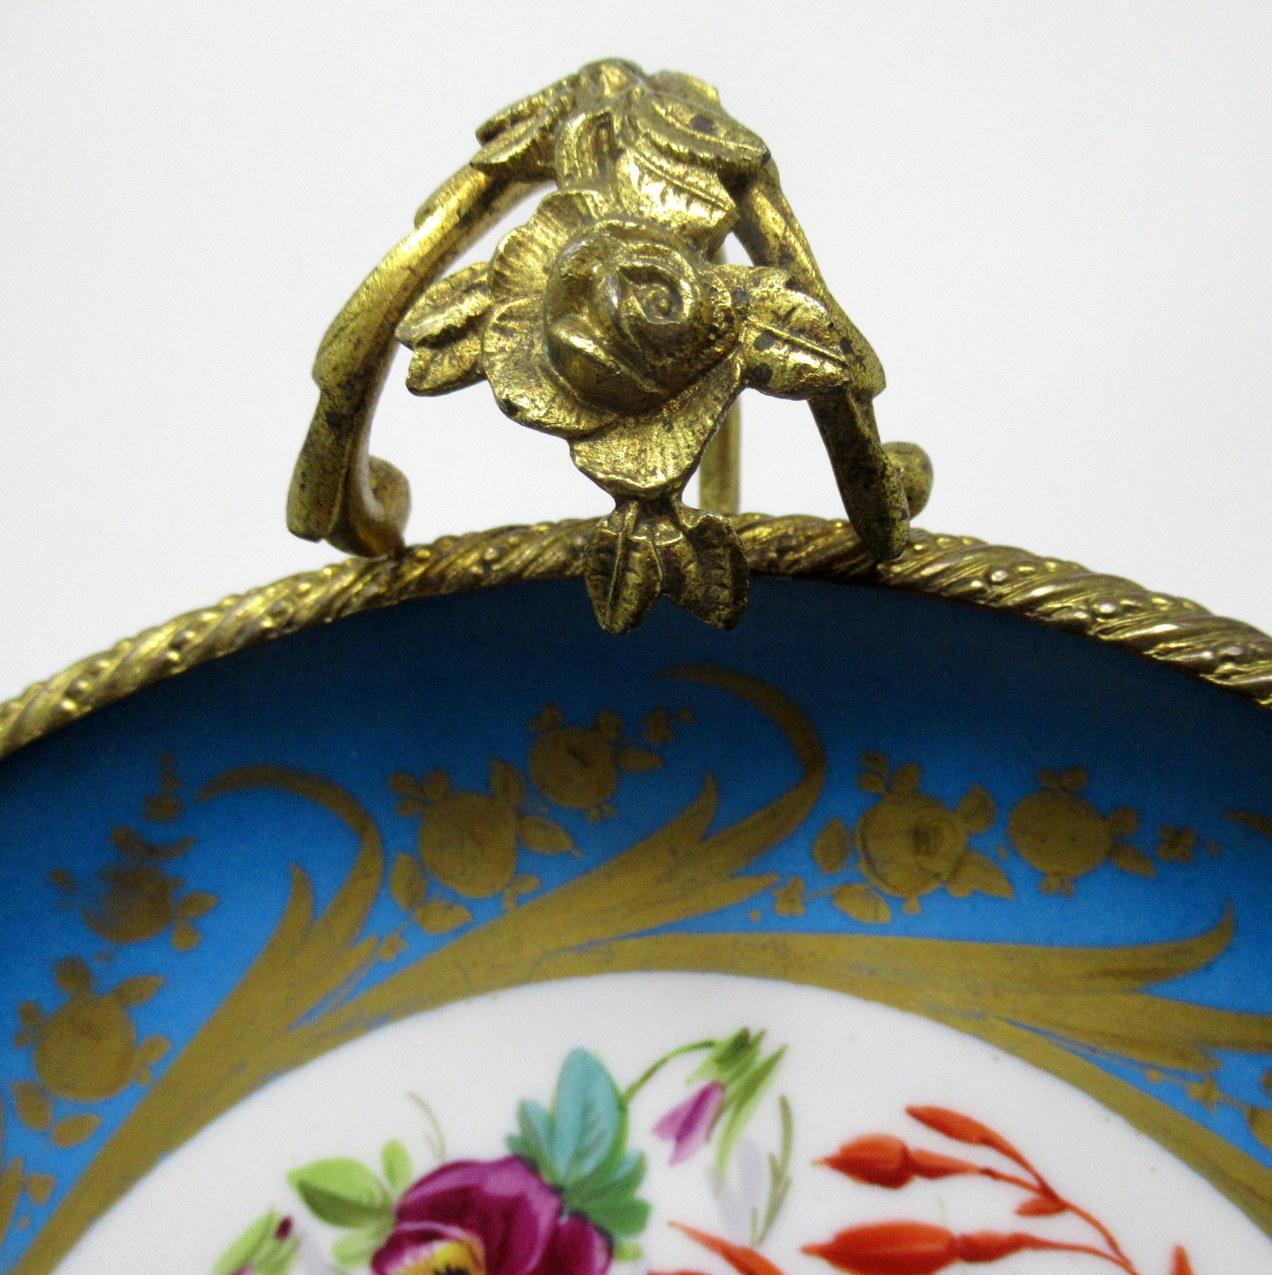 Antique French Sevres Ormolu Gilt Bronze Dore Porcelain Tazza Cabinet Plate Dish For Sale 4